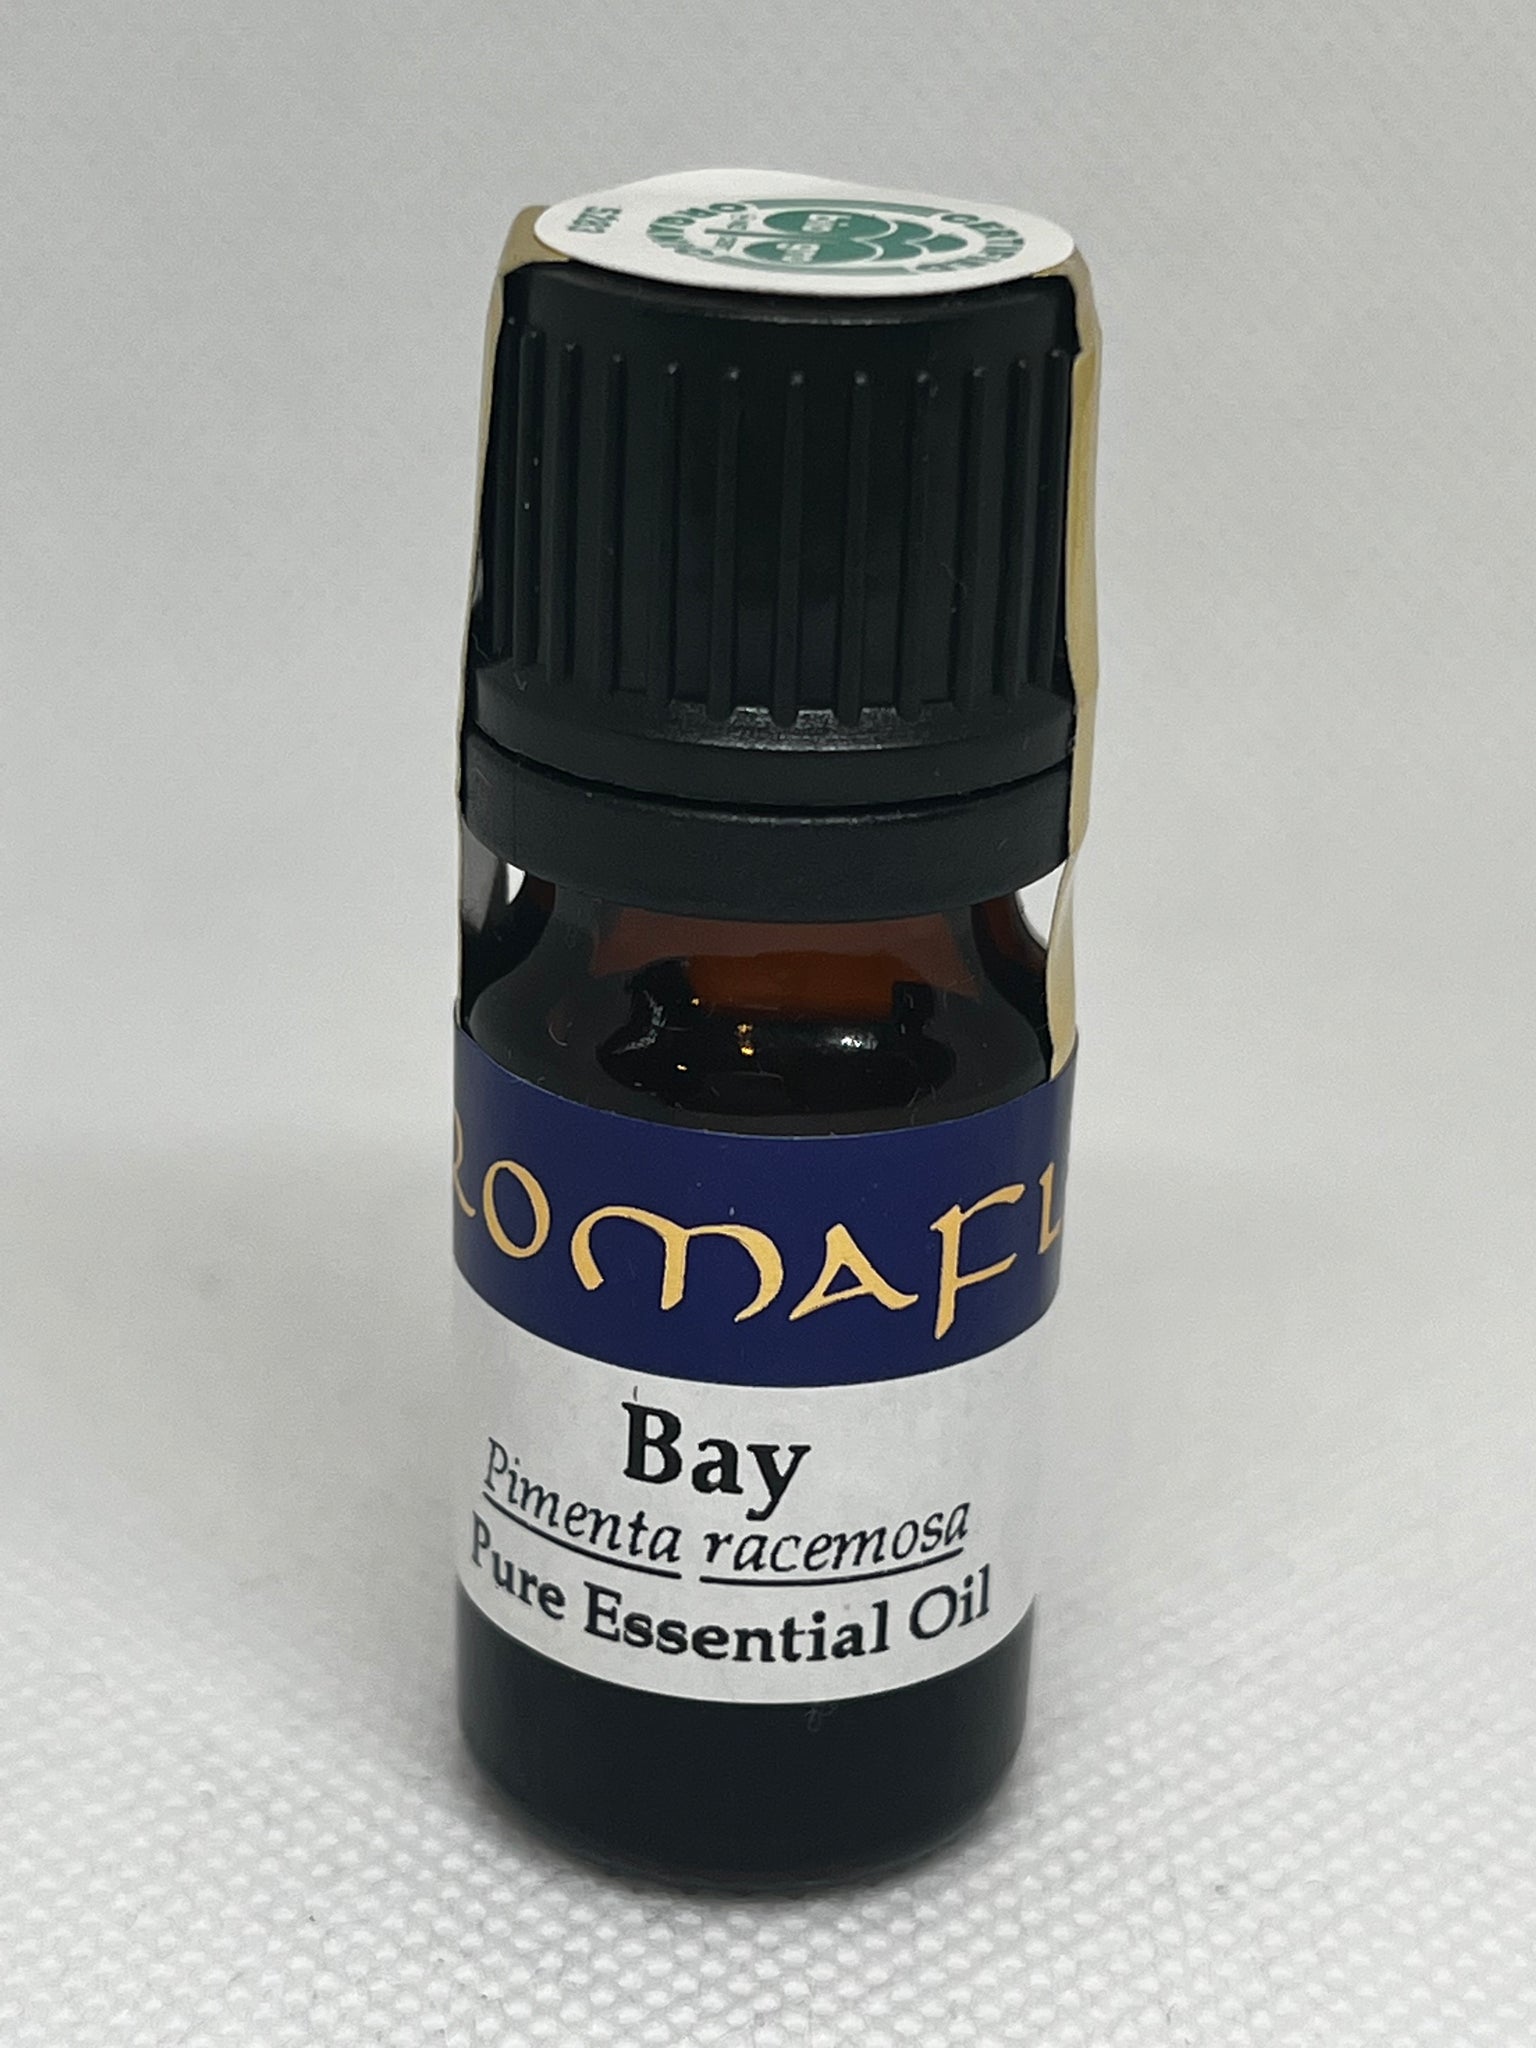 Bay Rum Essential Oil - 100% Pure Aromatherapy Grade Essential oil by  Nature's Note Organics - 0.3 Fl Oz